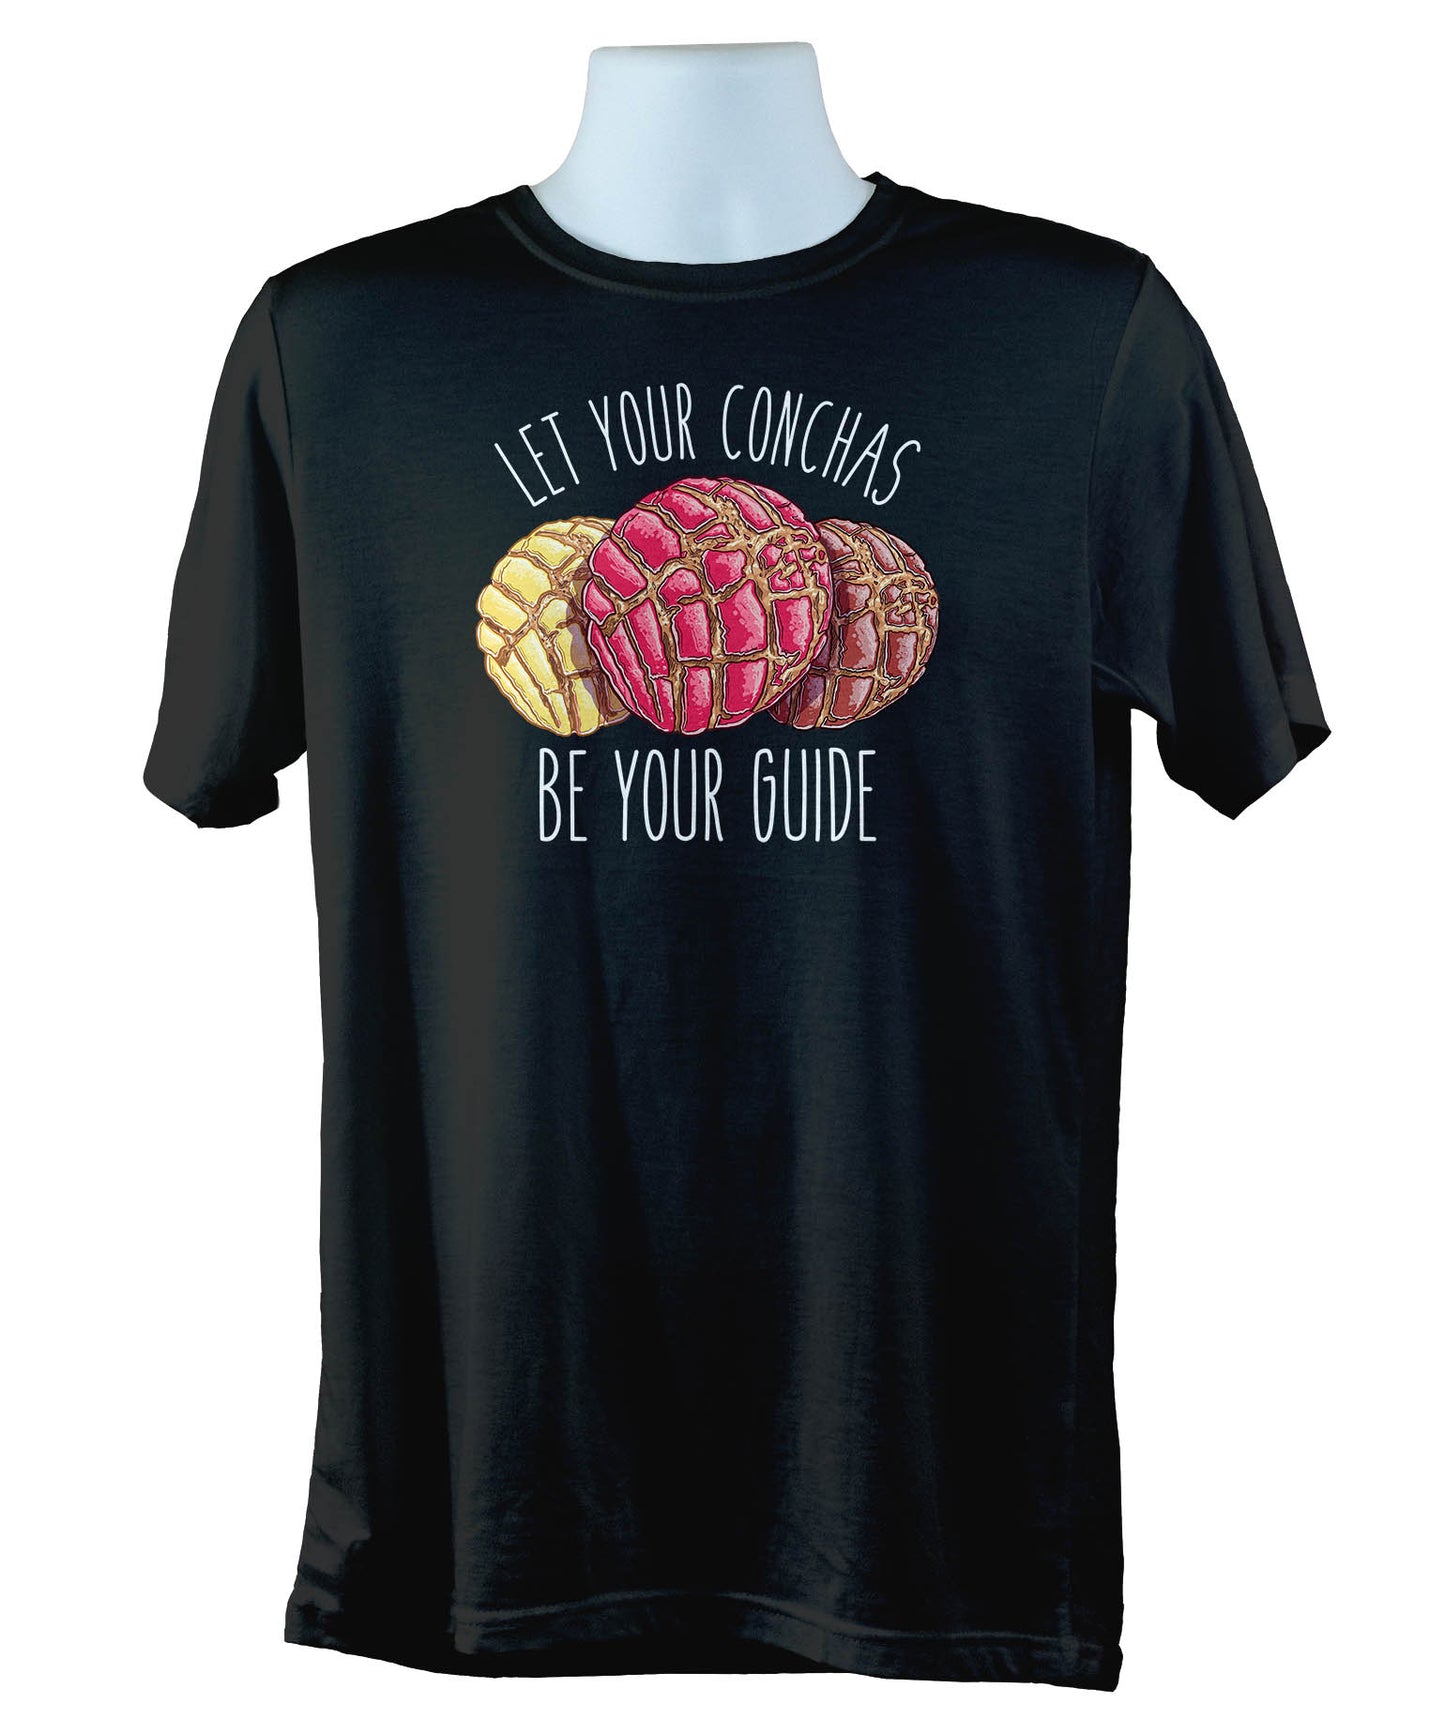 Let Your Conchas Be Your Guide Tshirt